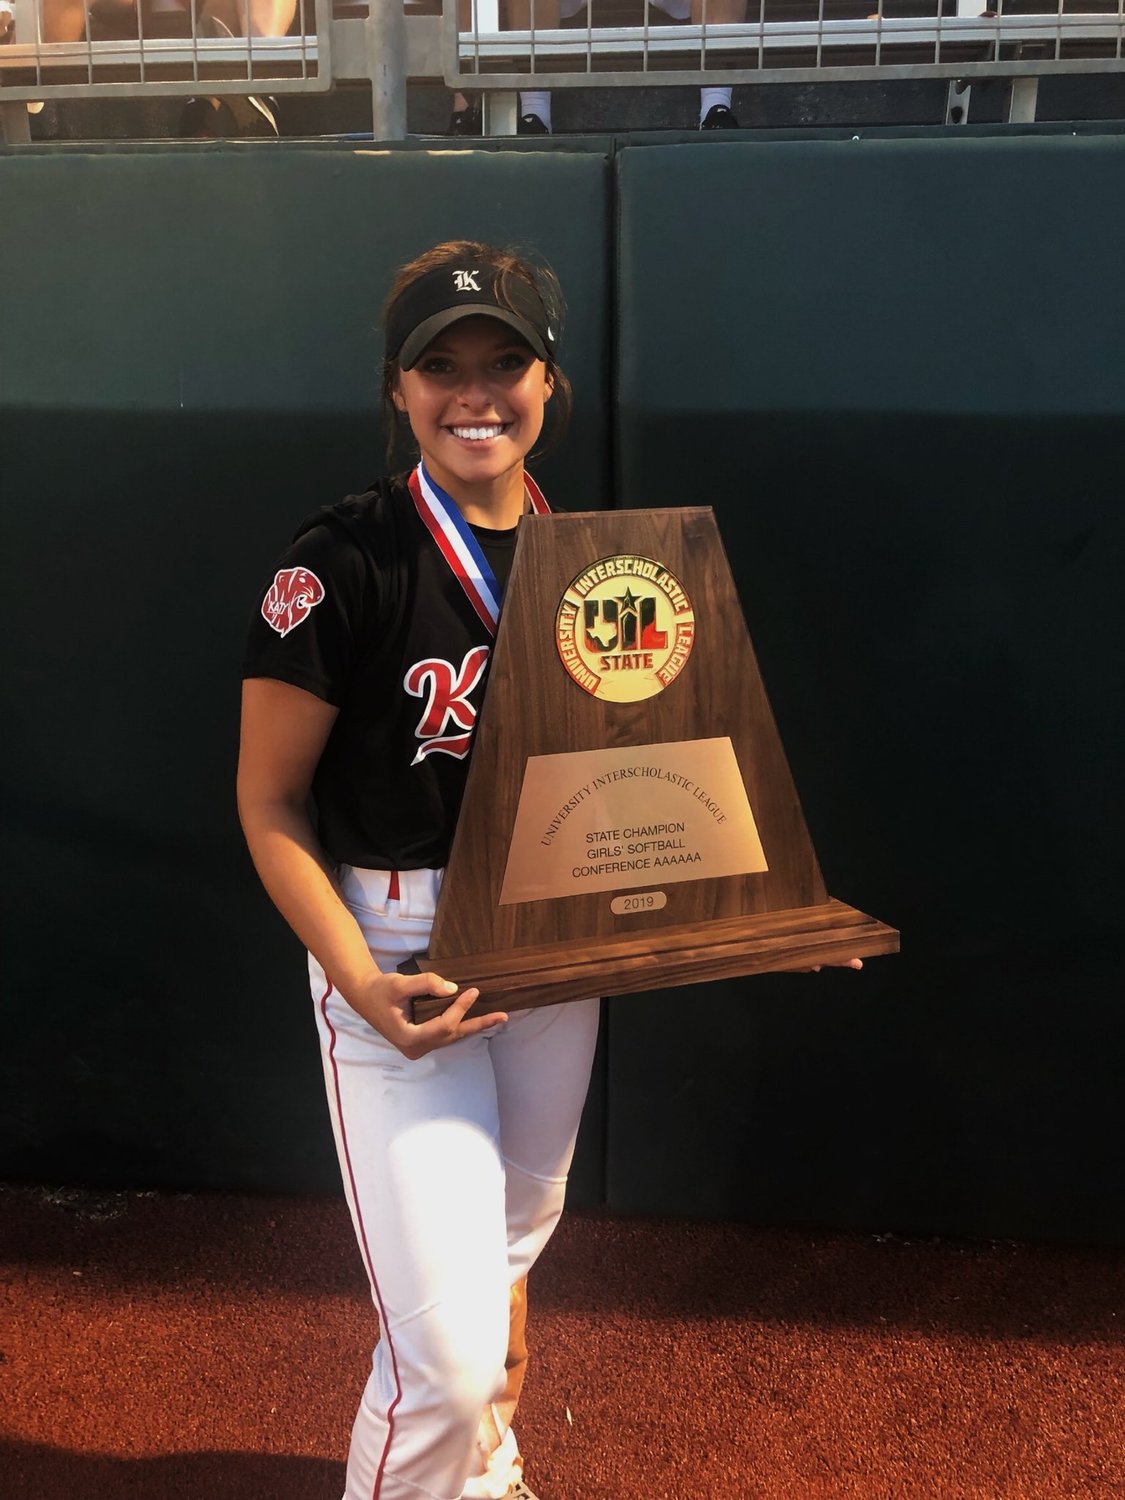 Sydney Blakeman has enjoyed a decorated high school career at Katy, with a state championship in 2019, and is set to continue her softball career at the next level with the University of Texas-San Antonio.